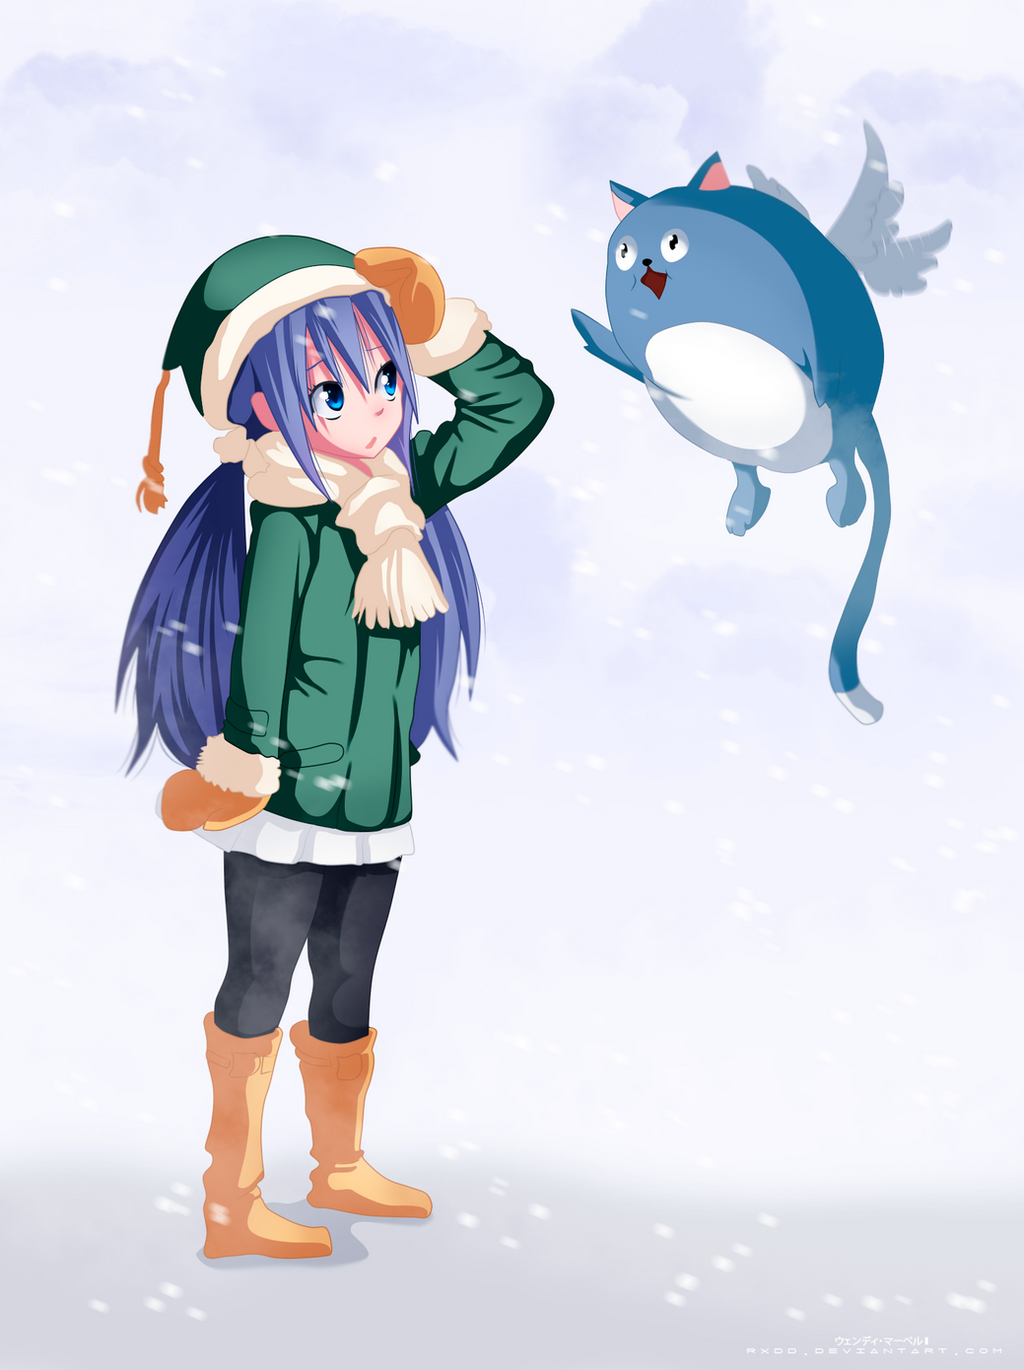 snowy_day_with_a_fat_happy_by_rxdd-d5nvjkc.png